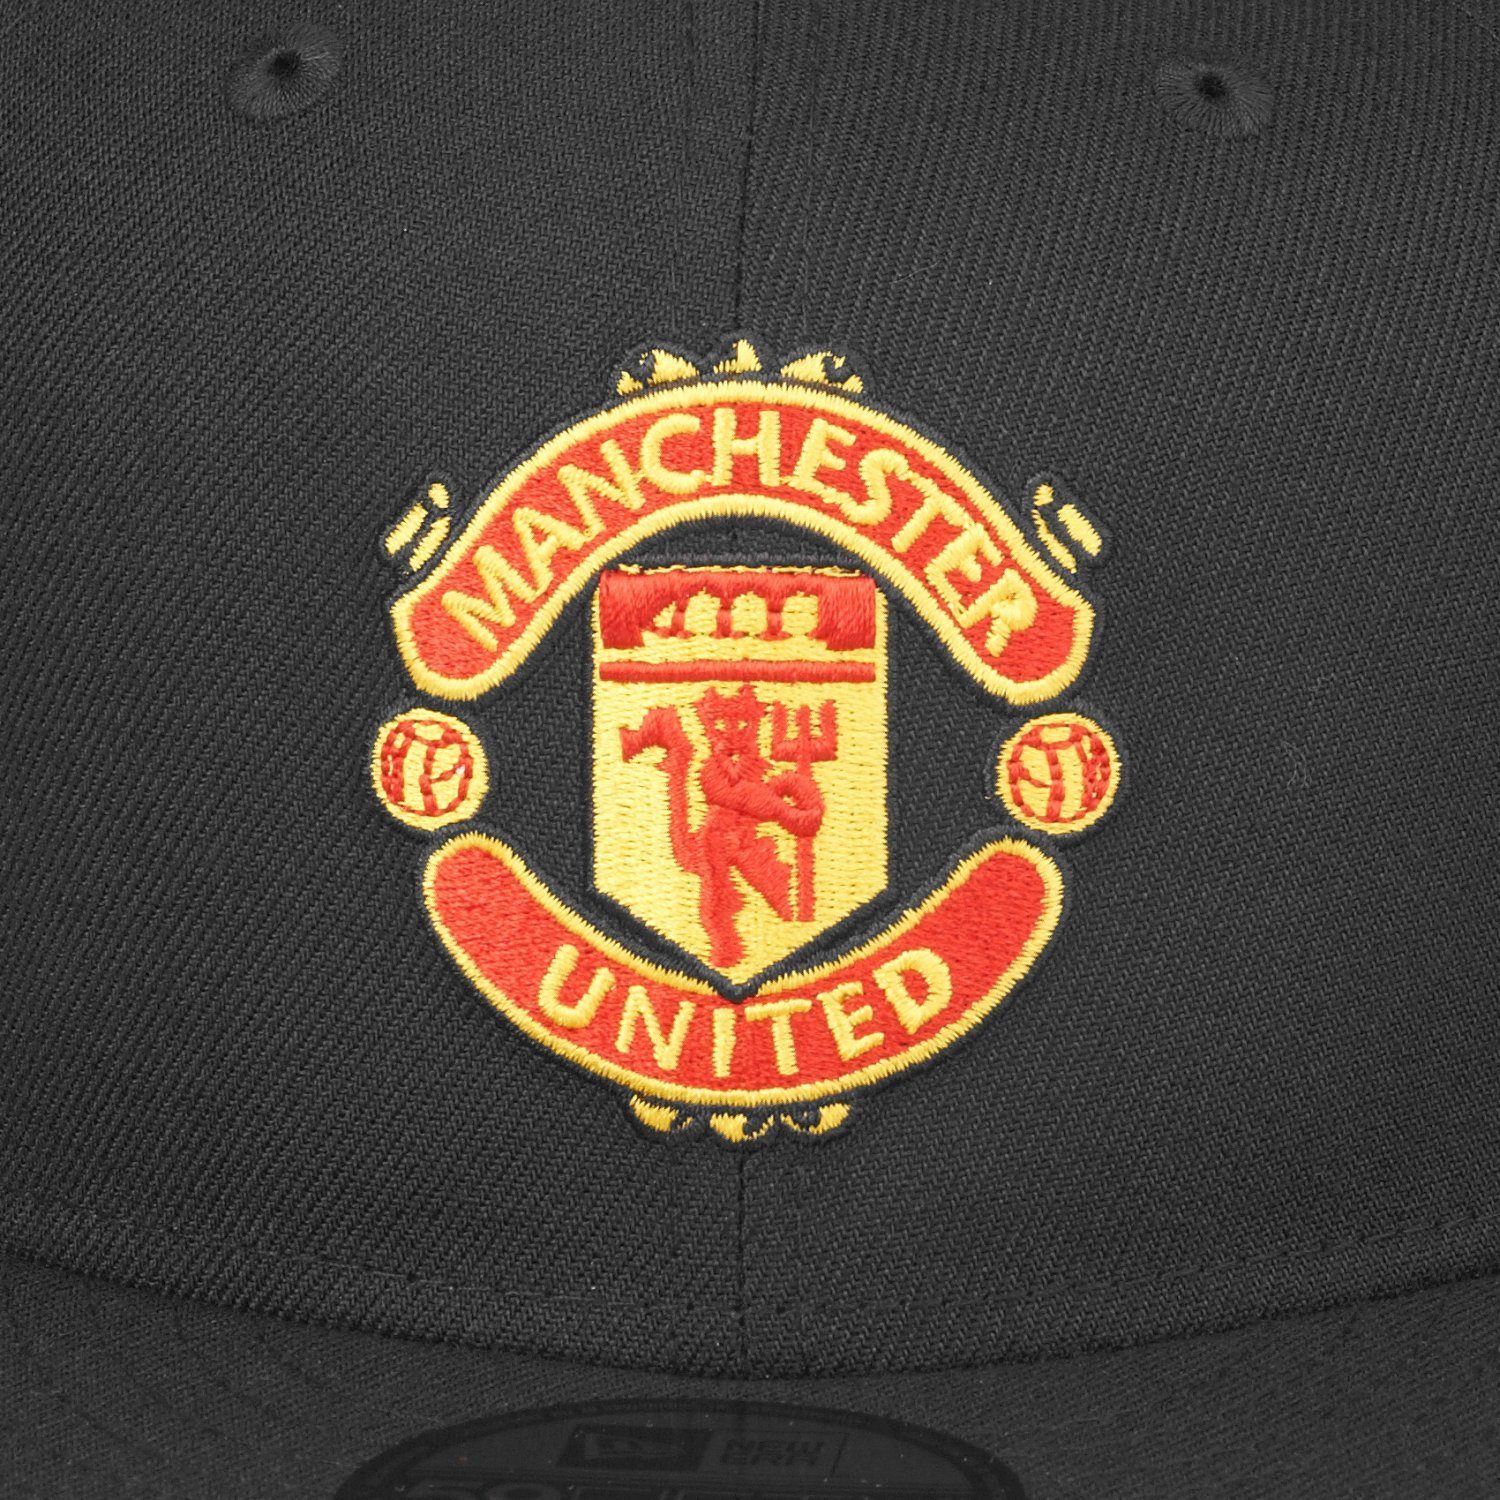 New United Fitted 59Fifty Manchester Cap MUFC Era